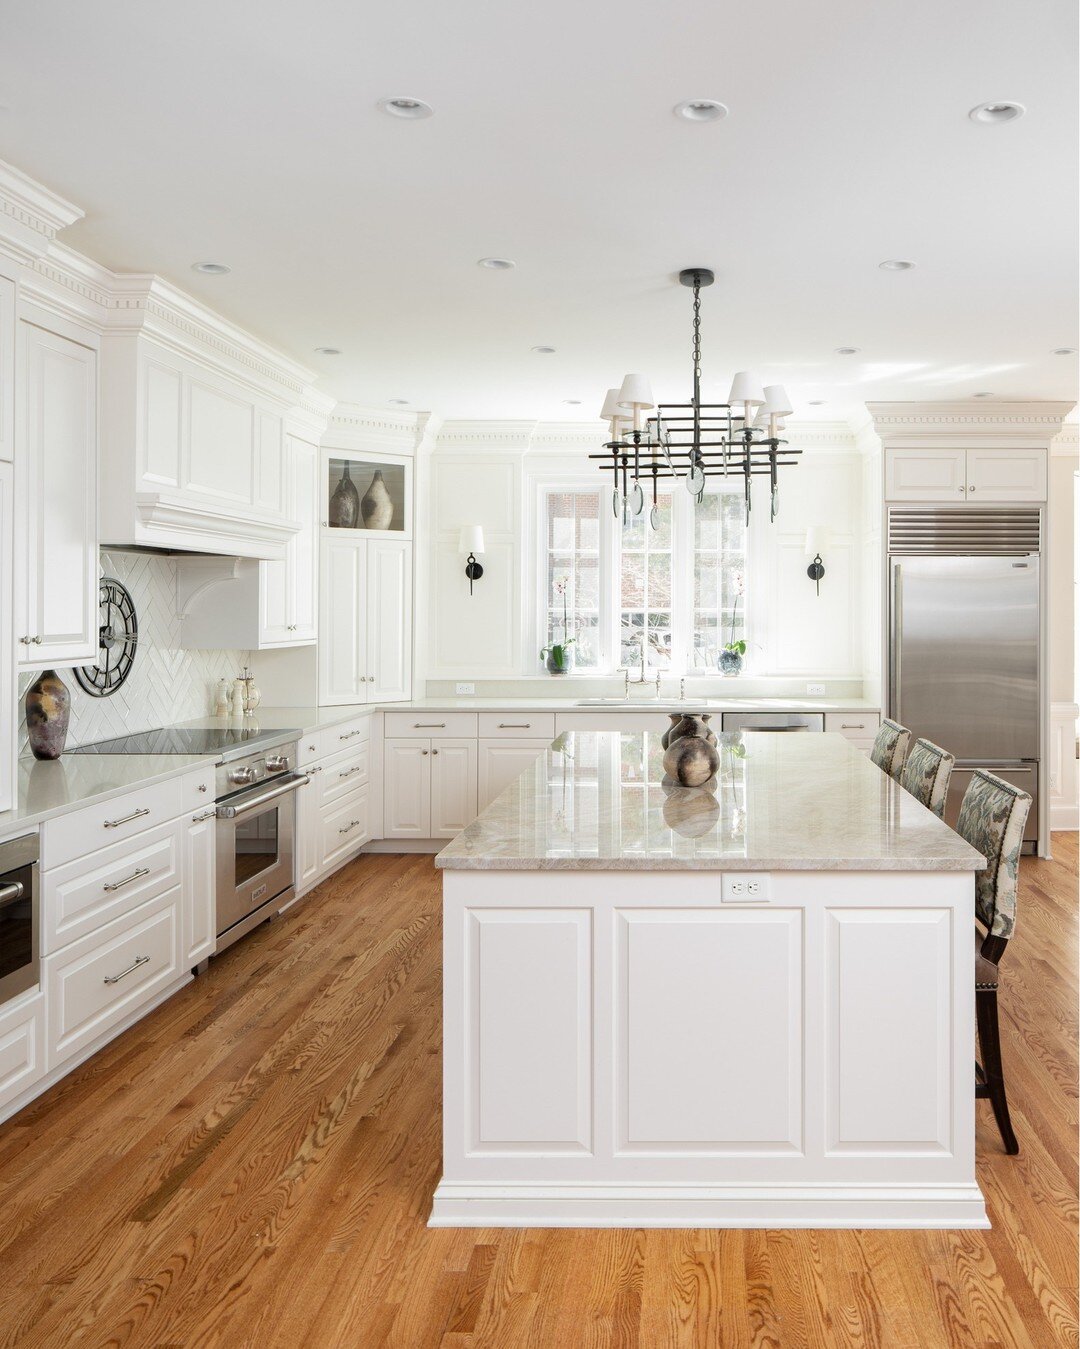 White design elements easily reflect natural light, making this luxurious kitchen feel and appear more spacious.